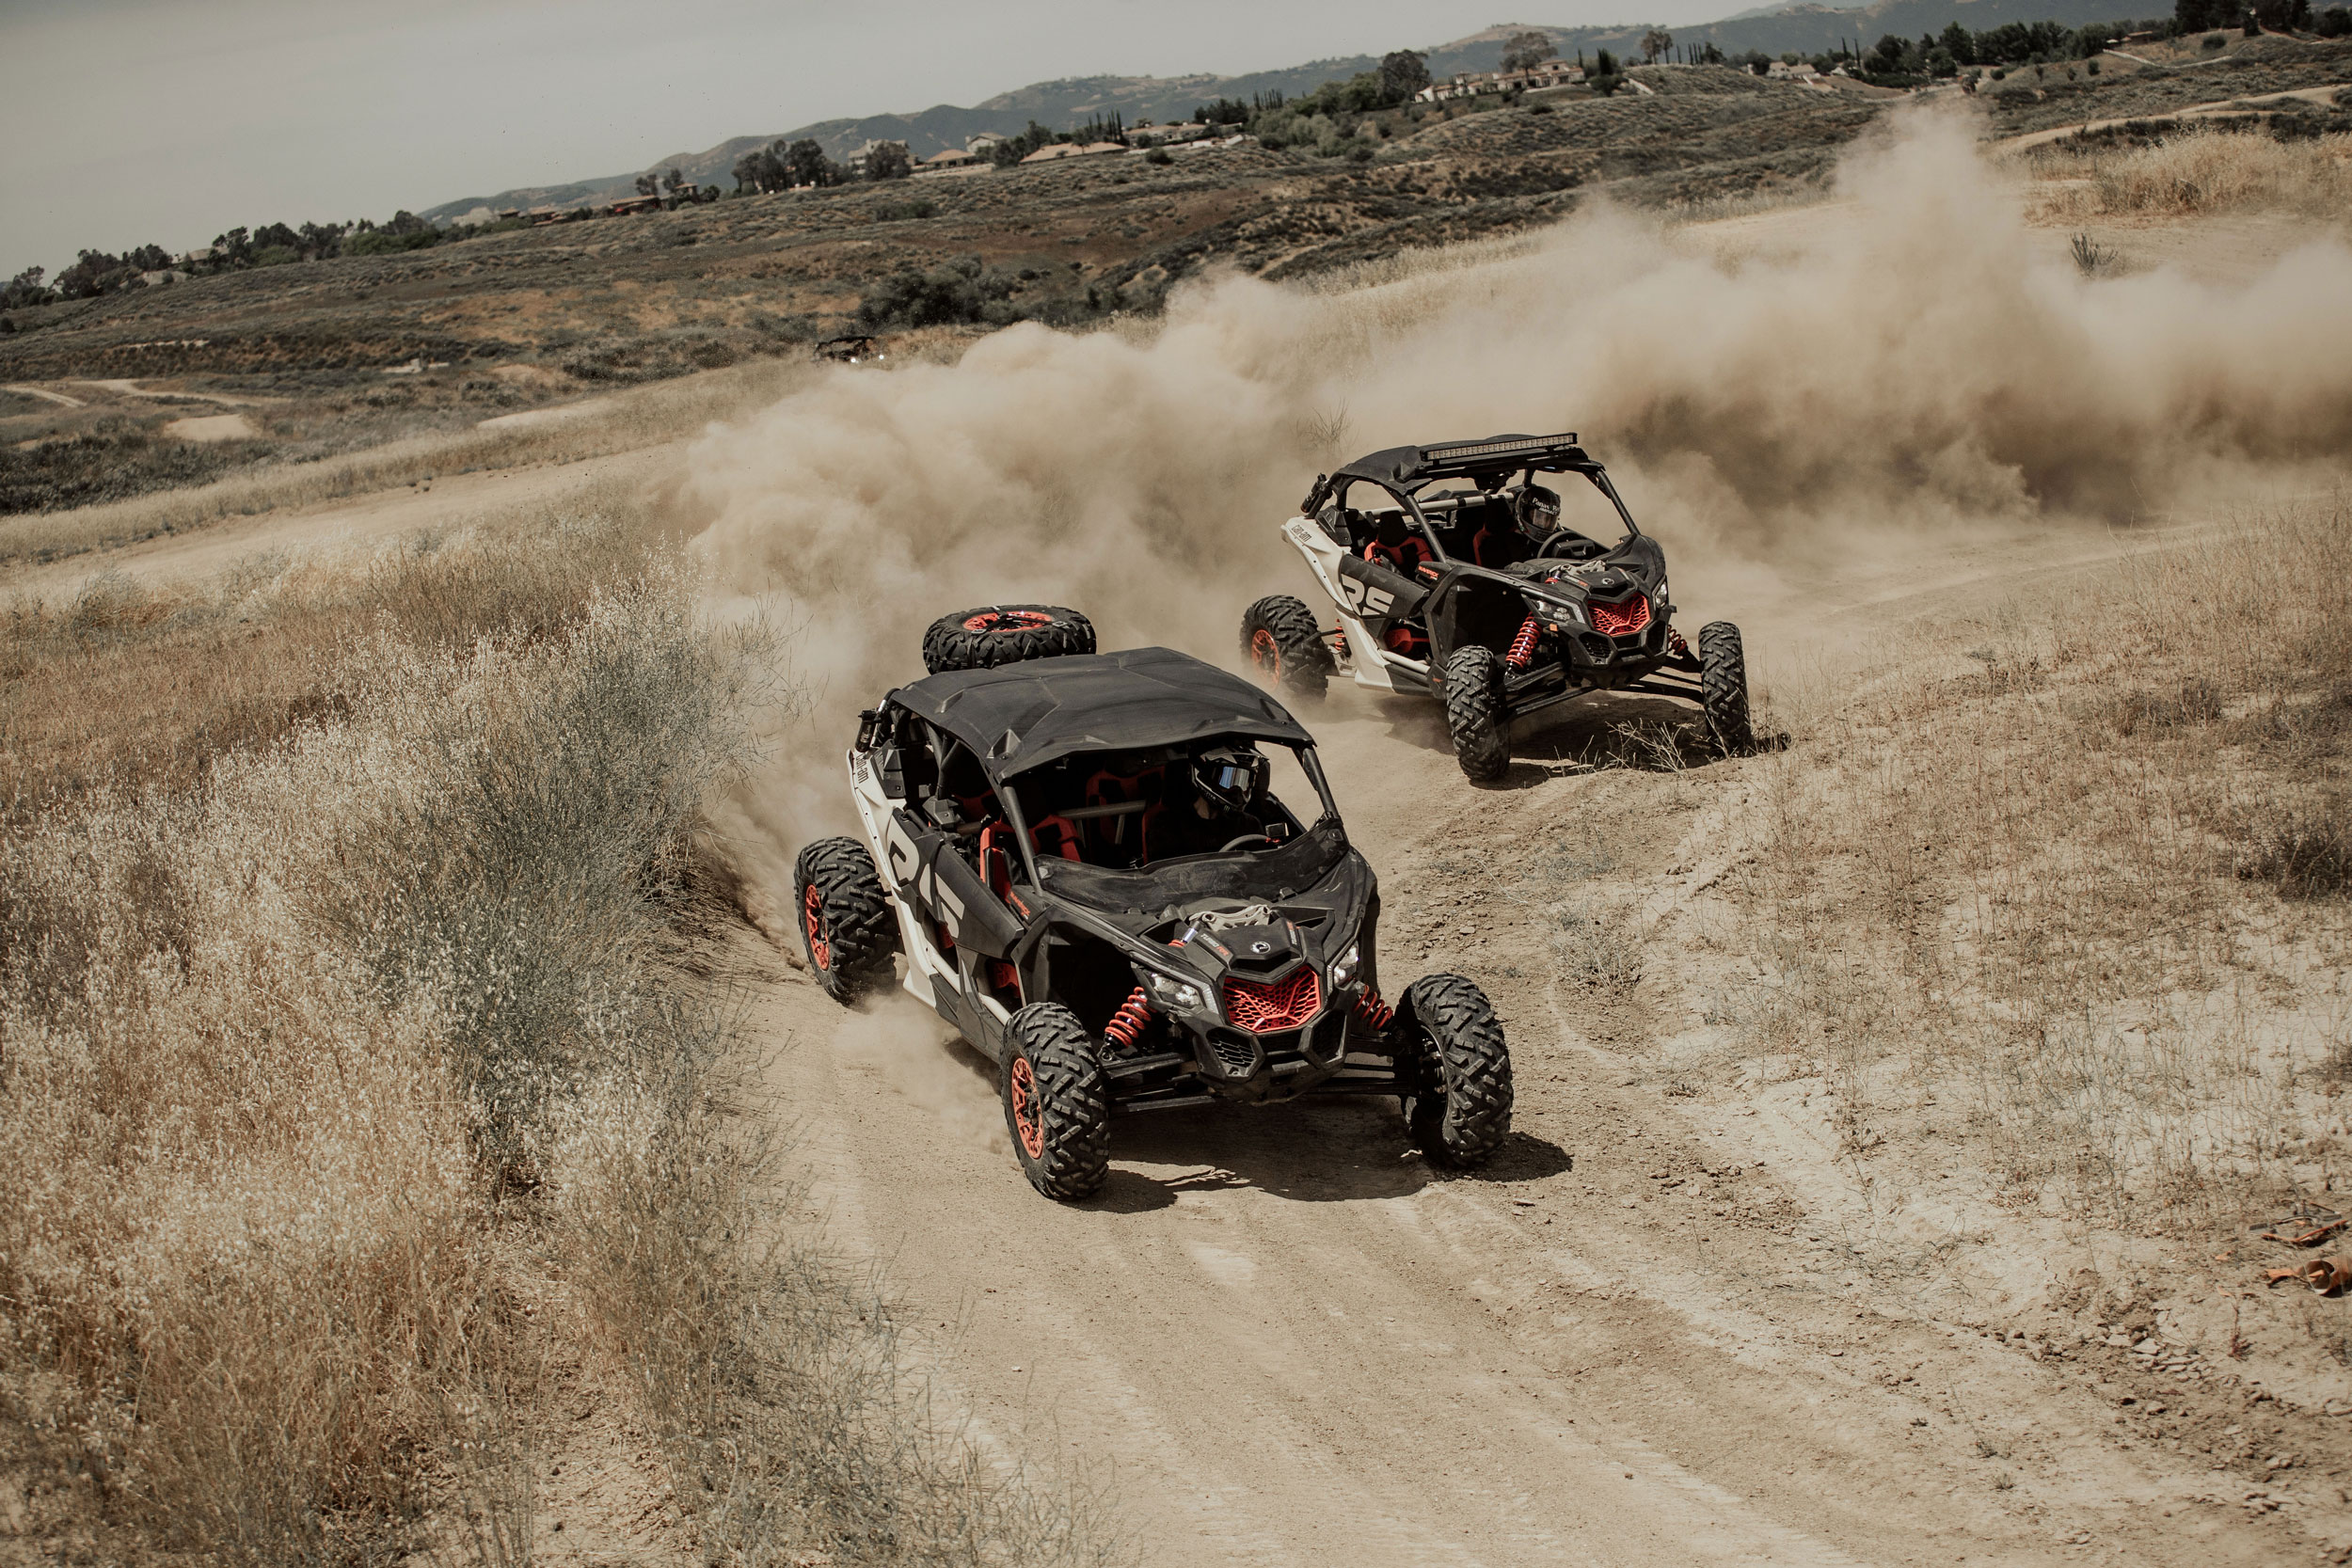 Two Can-Am Maverick X3 X rs side-by-sides drifting in a trail